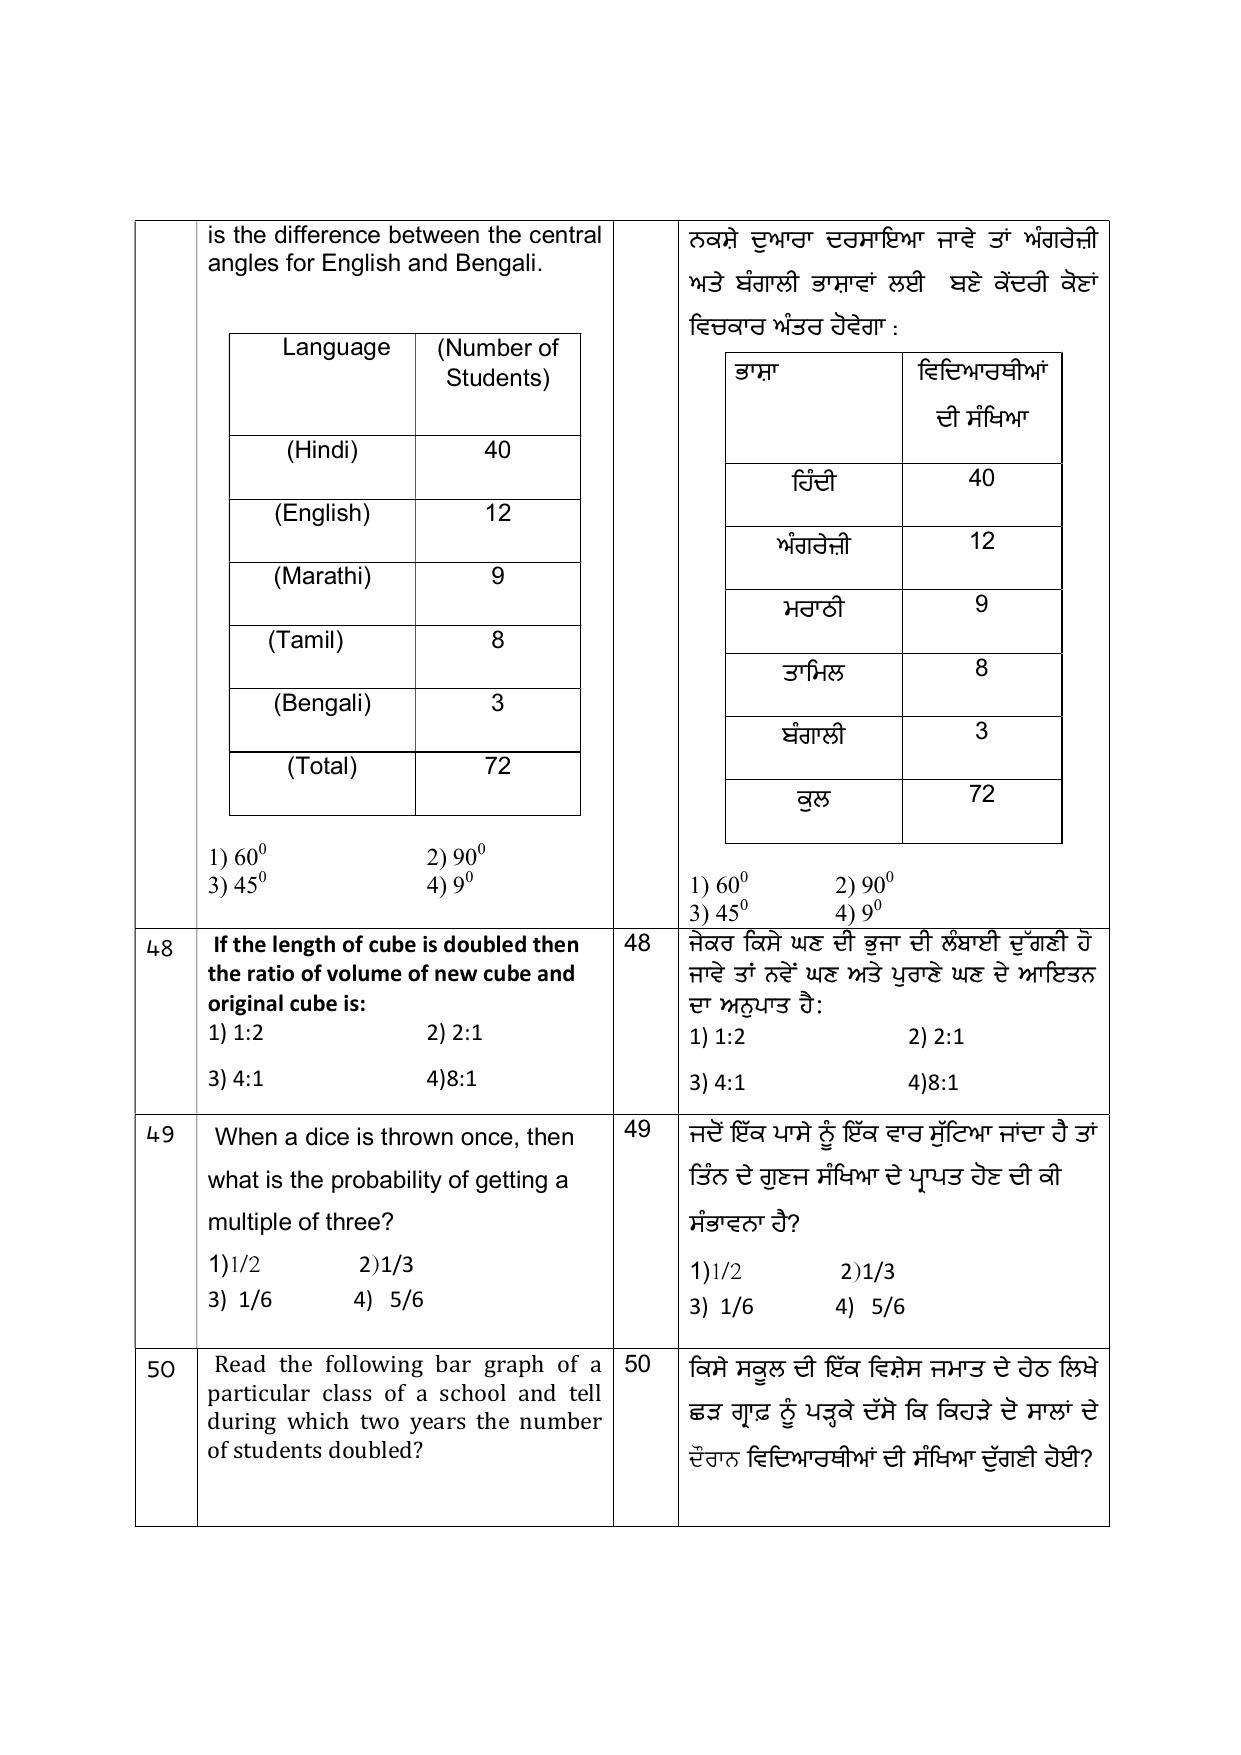 Punjab School of Eminence Class 9 Sample Question Paper - Page 8